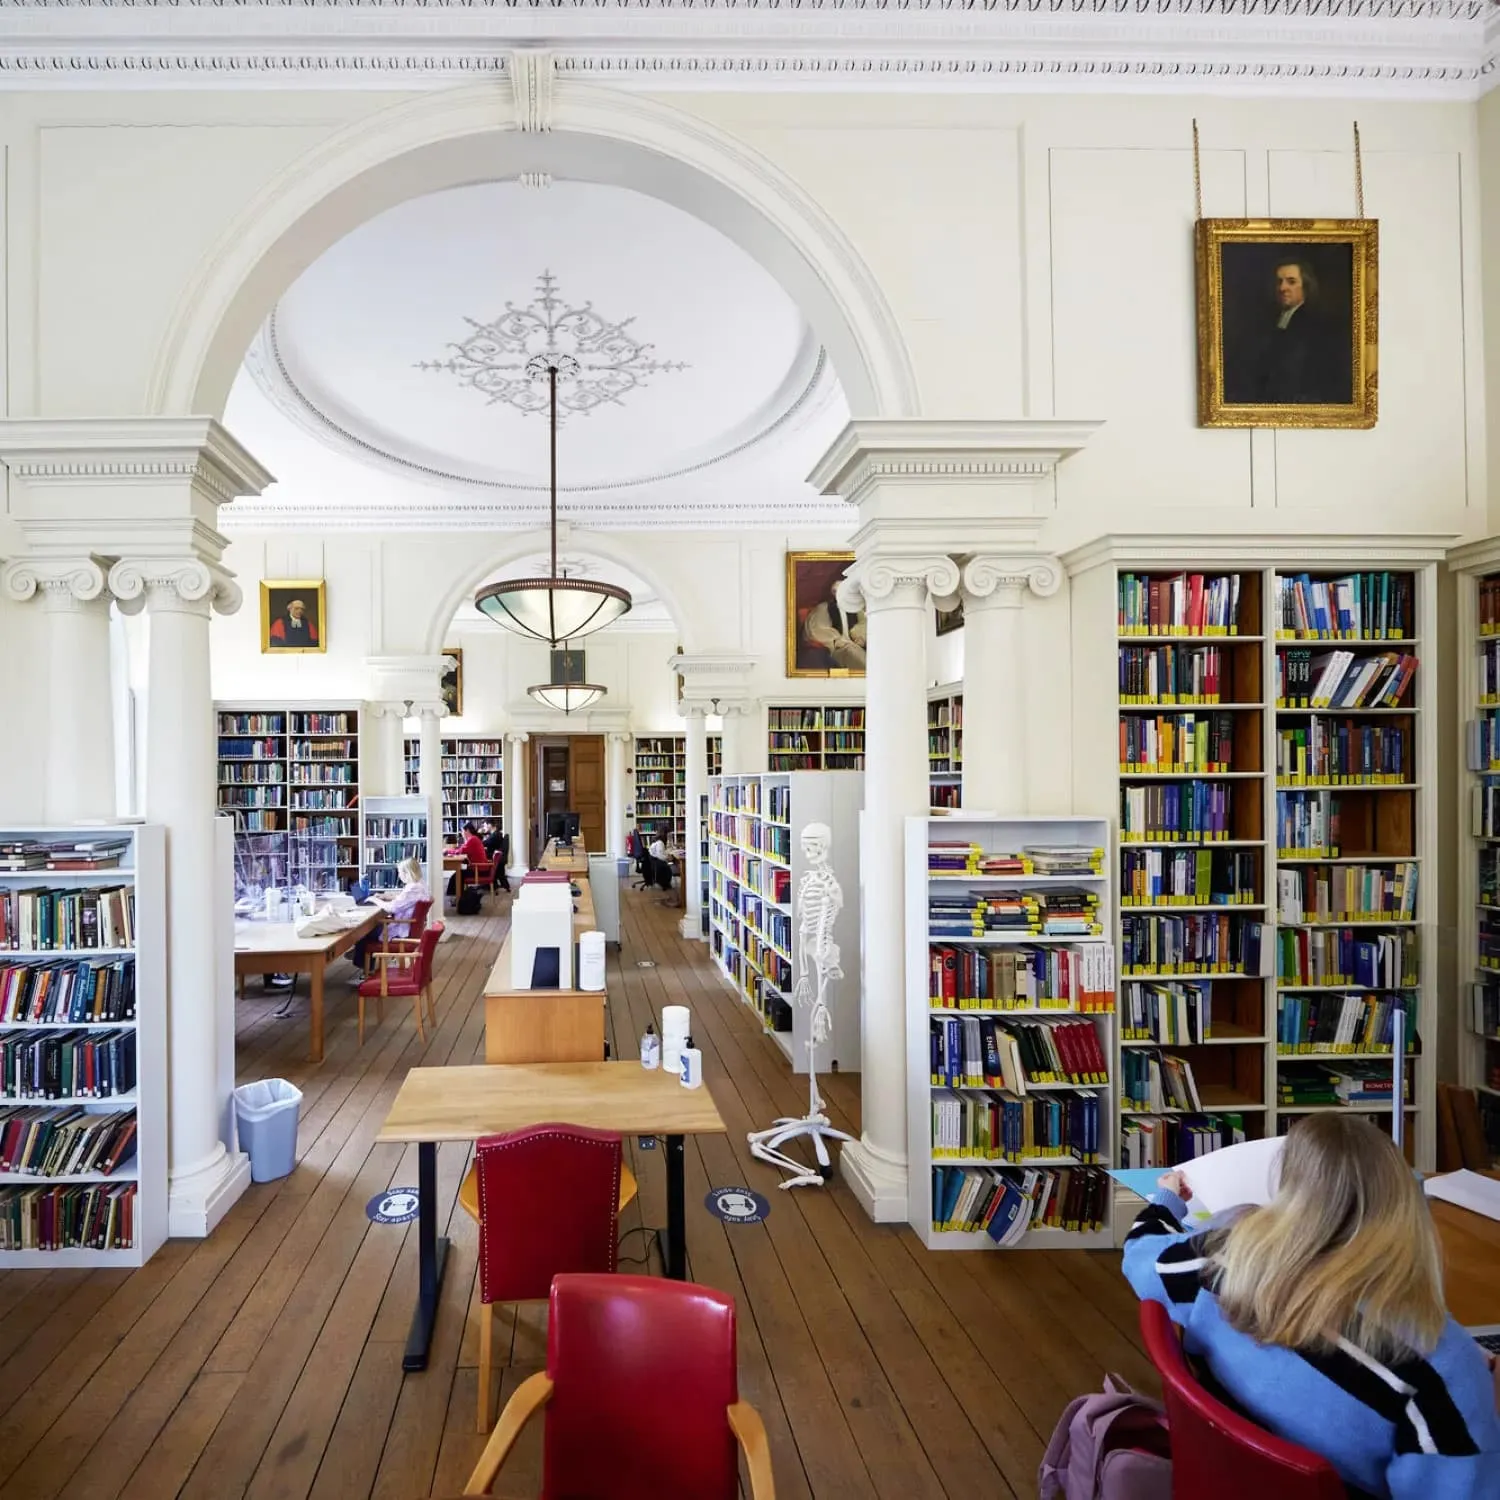 A library at Christ Church